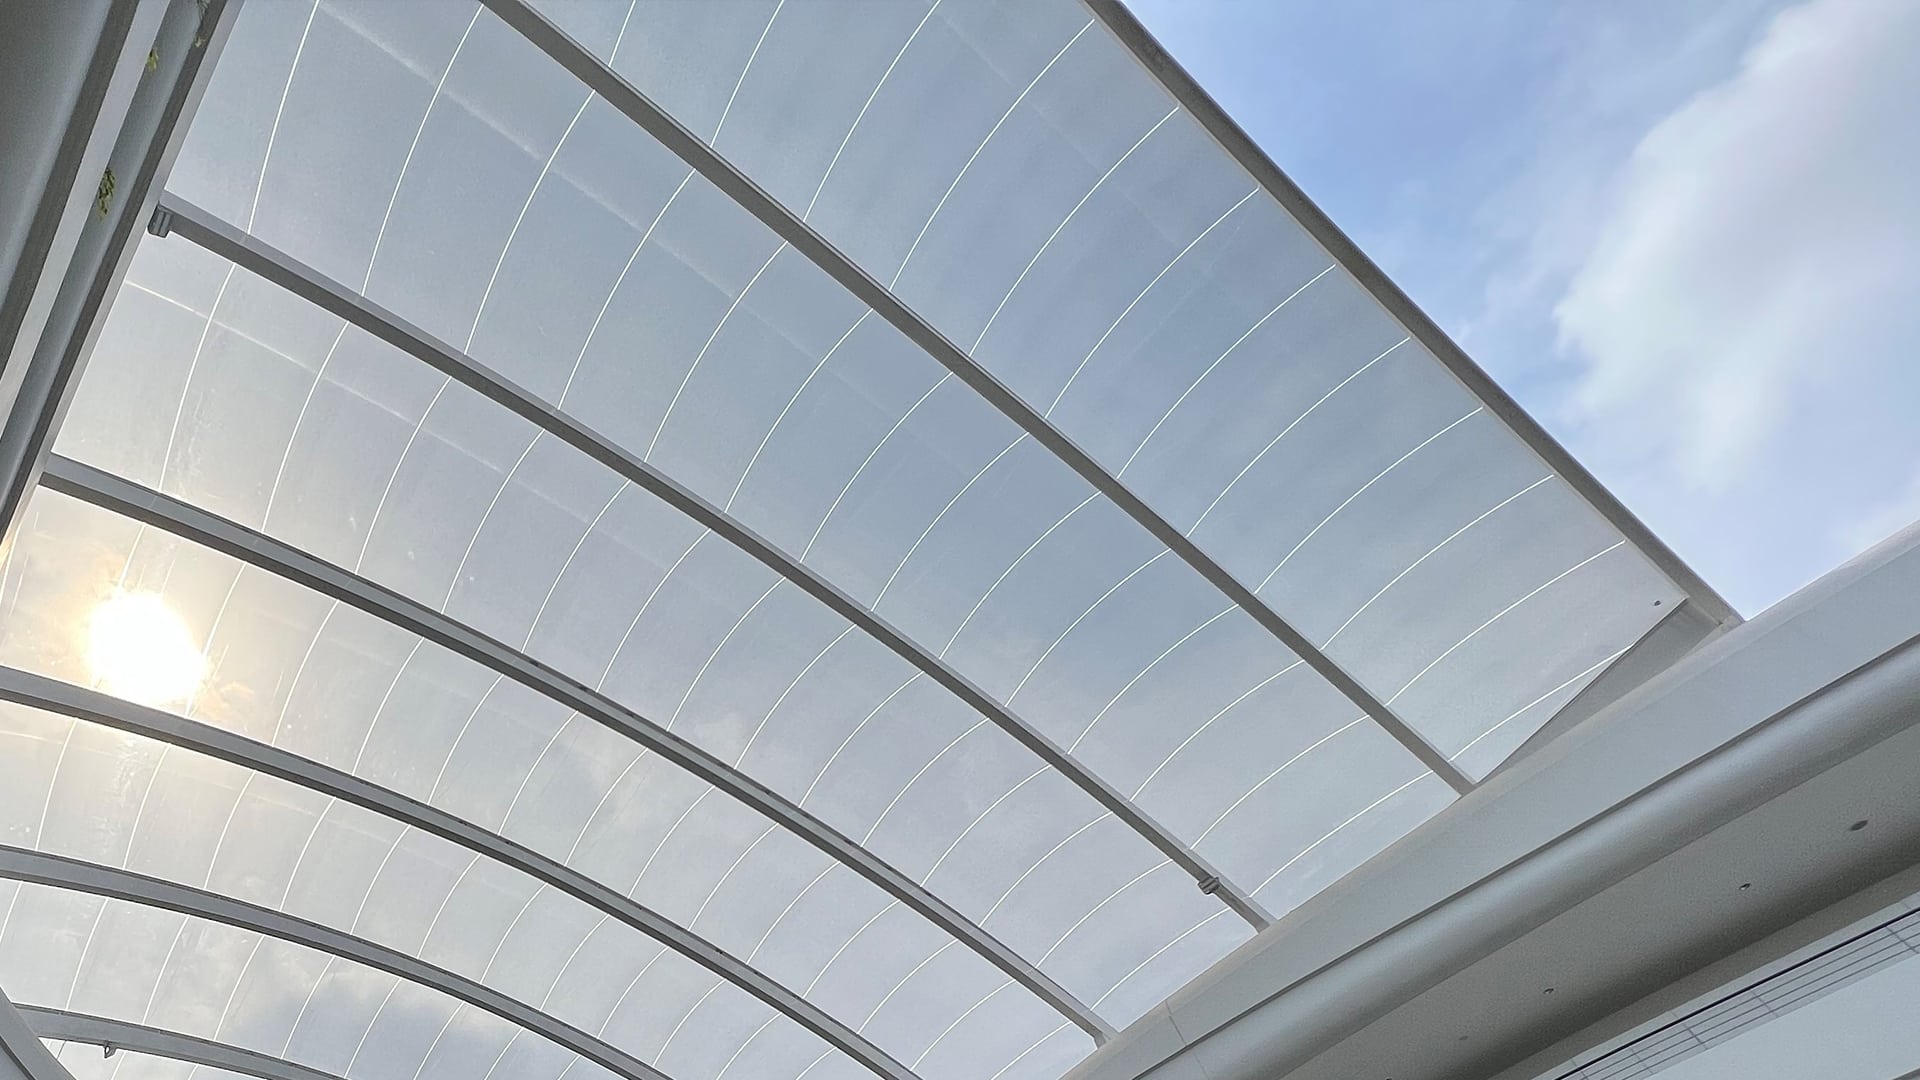 A Texlon ETFE canopy covers the entrance of K Mall Cambodia. It has a span of 30 meters with a slight twist.